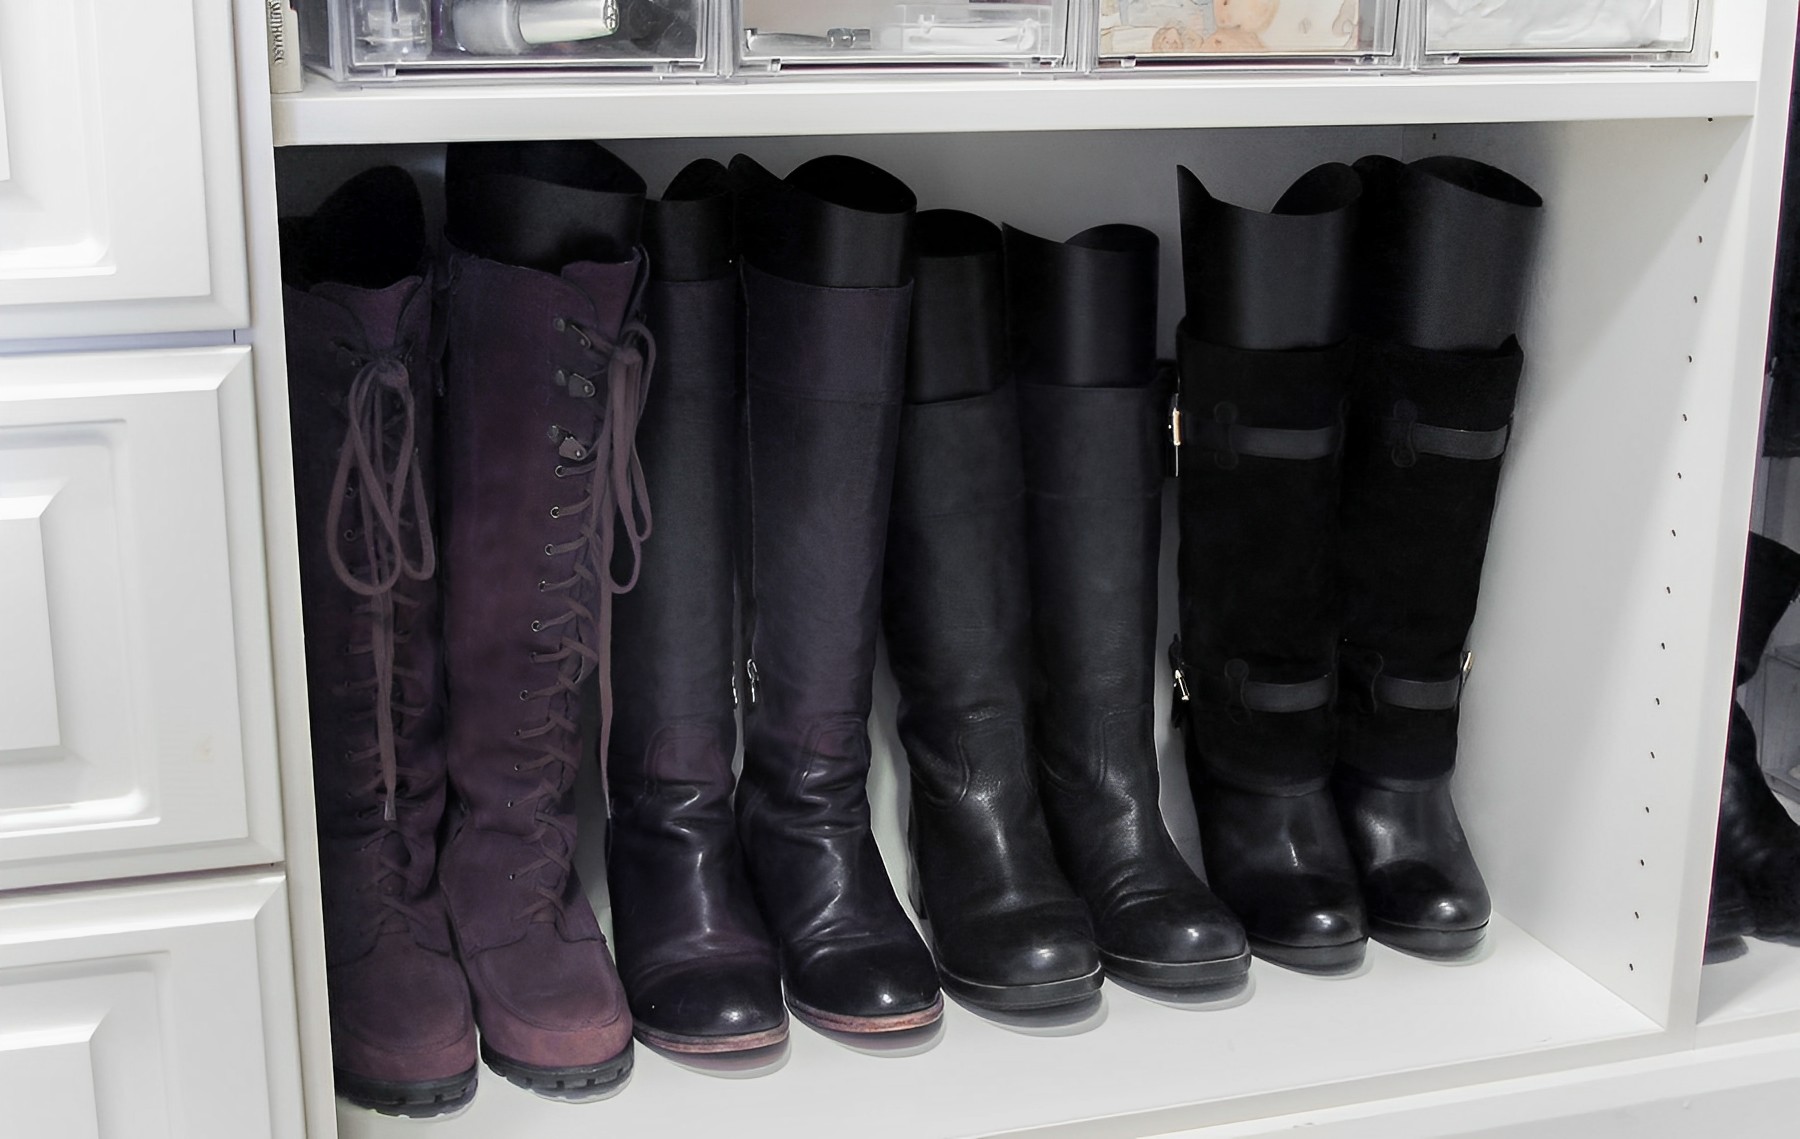 https://storables.com/wp-content/uploads/2023/09/how-to-store-boots-in-small-closet-1694140580.jpg